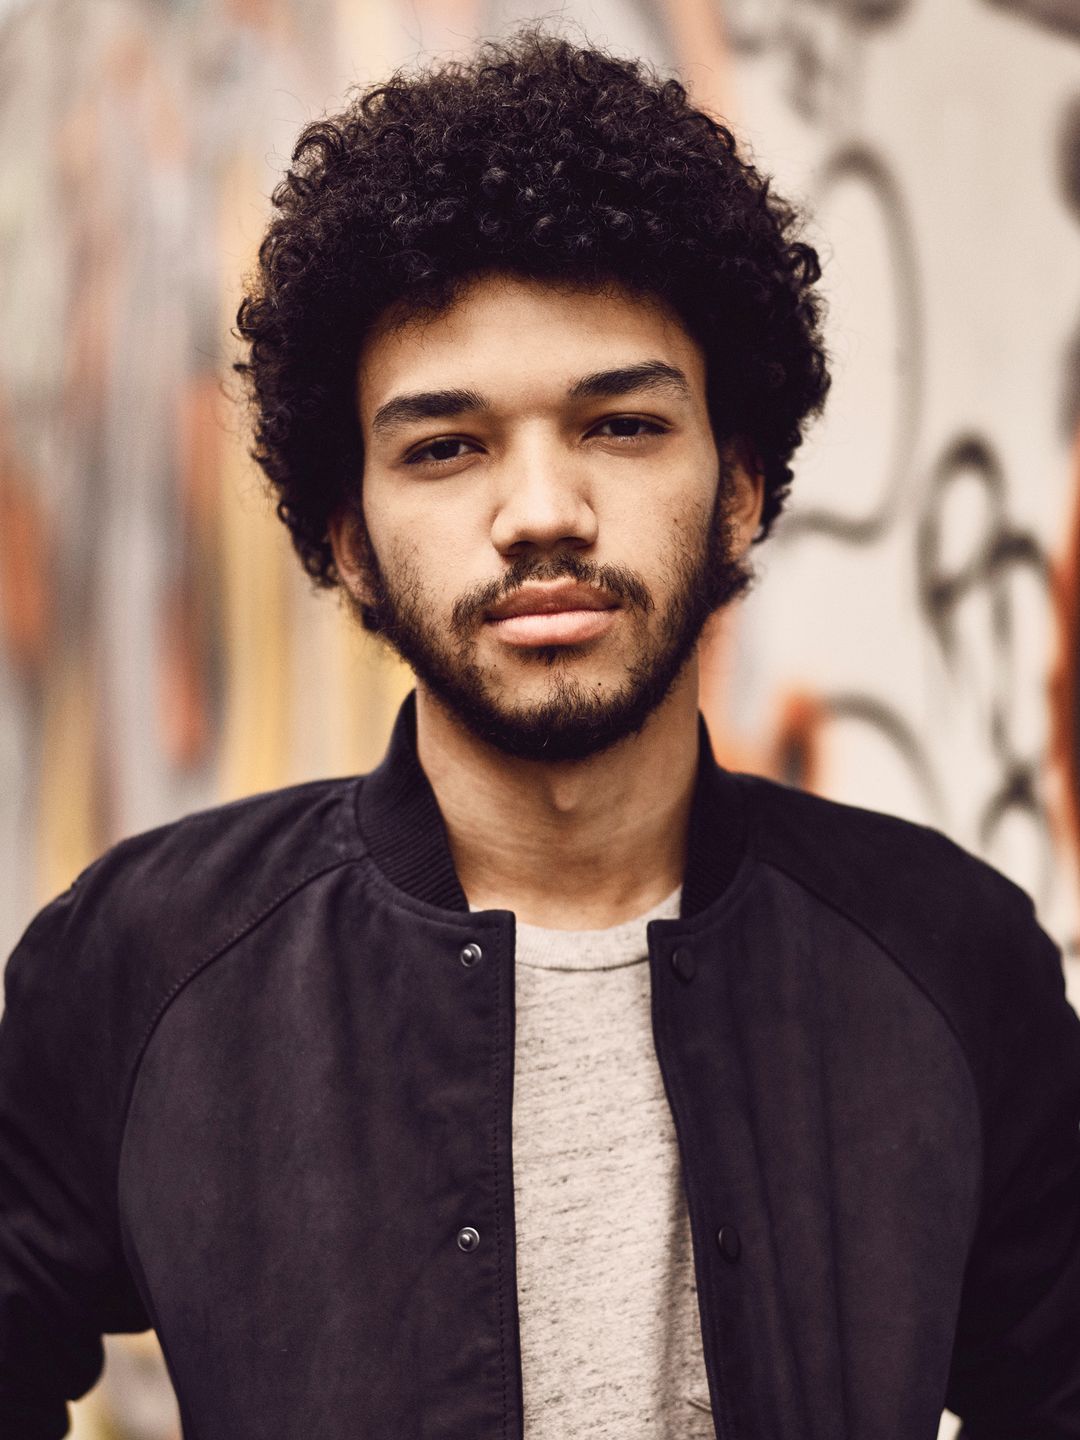 Justice Smith story of success